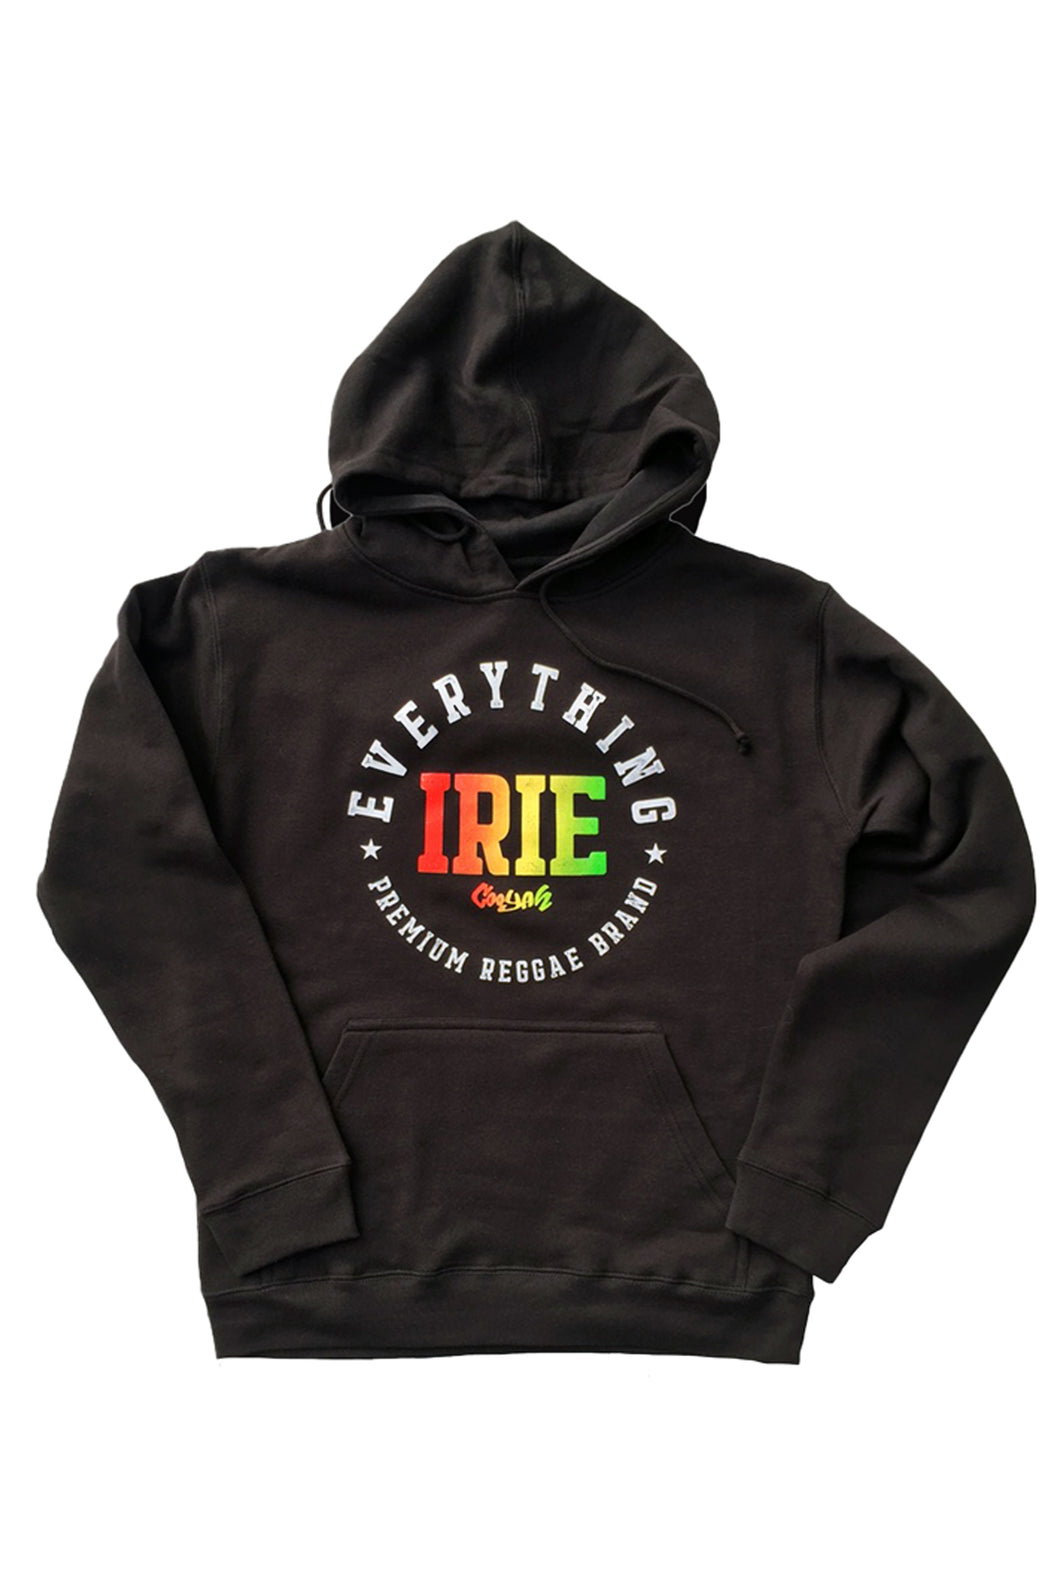 Everything Irie Hoodie by Cooyah Clothing